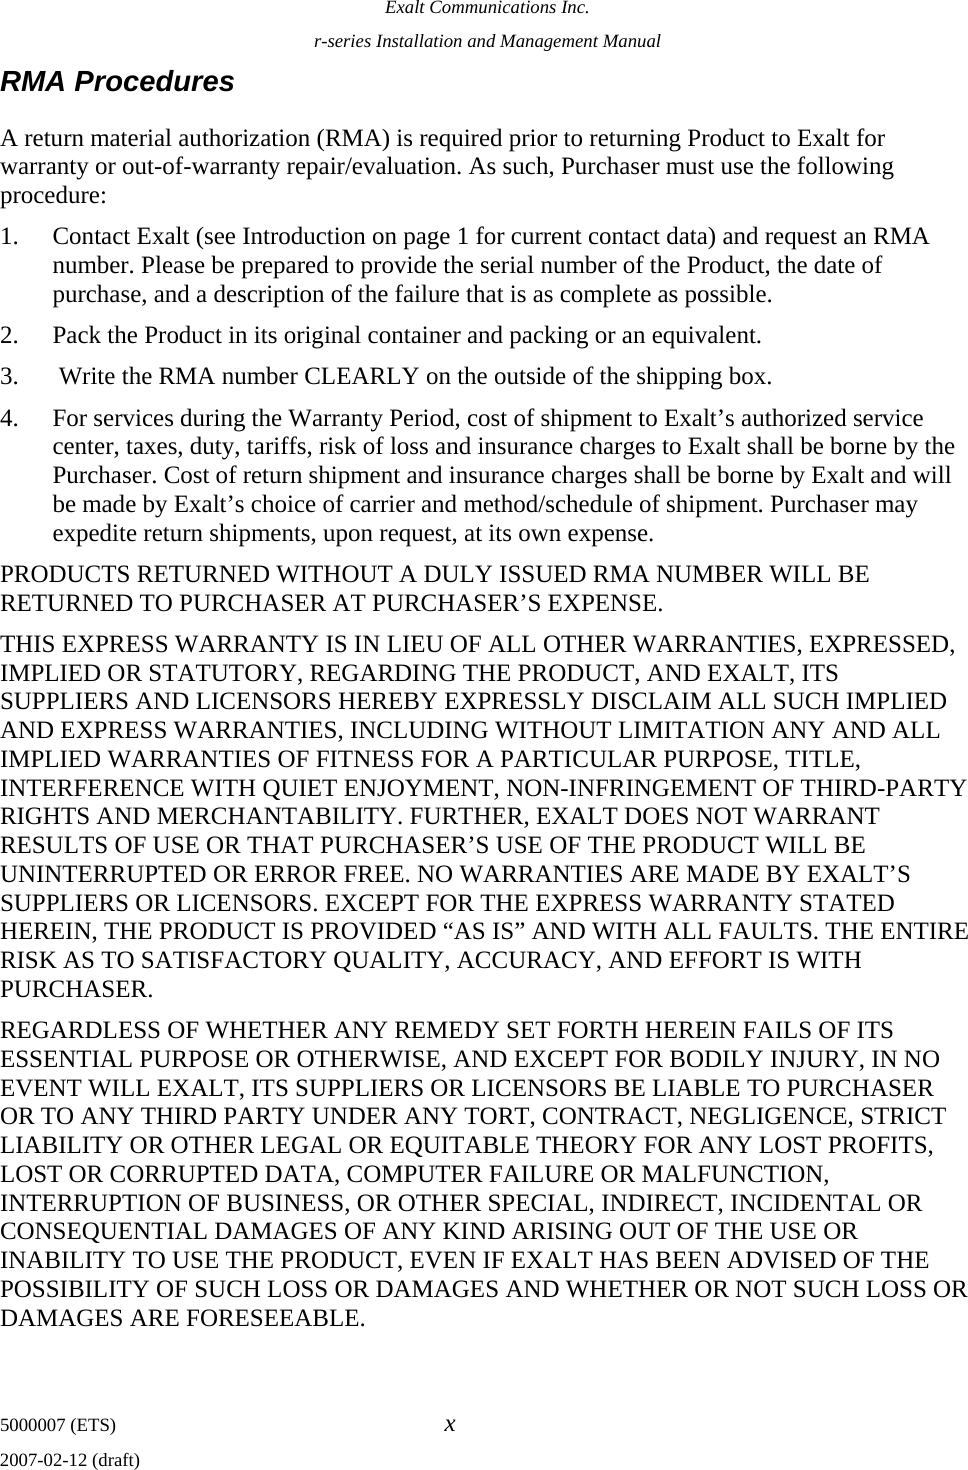 Exalt Communications Inc. r-series Installation and Management Manual 5000007 (ETS)  x 2007-02-12 (draft) RMA Procedures A return material authorization (RMA) is required prior to returning Product to Exalt for warranty or out-of-warranty repair/evaluation. As such, Purchaser must use the following procedure:  1. Contact Exalt (see Introduction on page 1 for current contact data) and request an RMA number. Please be prepared to provide the serial number of the Product, the date of purchase, and a description of the failure that is as complete as possible. 2. Pack the Product in its original container and packing or an equivalent. 3.  Write the RMA number CLEARLY on the outside of the shipping box. 4. For services during the Warranty Period, cost of shipment to Exalt’s authorized service center, taxes, duty, tariffs, risk of loss and insurance charges to Exalt shall be borne by the Purchaser. Cost of return shipment and insurance charges shall be borne by Exalt and will be made by Exalt’s choice of carrier and method/schedule of shipment. Purchaser may expedite return shipments, upon request, at its own expense. PRODUCTS RETURNED WITHOUT A DULY ISSUED RMA NUMBER WILL BE RETURNED TO PURCHASER AT PURCHASER’S EXPENSE. THIS EXPRESS WARRANTY IS IN LIEU OF ALL OTHER WARRANTIES, EXPRESSED, IMPLIED OR STATUTORY, REGARDING THE PRODUCT, AND EXALT, ITS SUPPLIERS AND LICENSORS HEREBY EXPRESSLY DISCLAIM ALL SUCH IMPLIED AND EXPRESS WARRANTIES, INCLUDING WITHOUT LIMITATION ANY AND ALL IMPLIED WARRANTIES OF FITNESS FOR A PARTICULAR PURPOSE, TITLE, INTERFERENCE WITH QUIET ENJOYMENT, NON-INFRINGEMENT OF THIRD-PARTY RIGHTS AND MERCHANTABILITY. FURTHER, EXALT DOES NOT WARRANT RESULTS OF USE OR THAT PURCHASER’S USE OF THE PRODUCT WILL BE UNINTERRUPTED OR ERROR FREE. NO WARRANTIES ARE MADE BY EXALT’S SUPPLIERS OR LICENSORS. EXCEPT FOR THE EXPRESS WARRANTY STATED HEREIN, THE PRODUCT IS PROVIDED “AS IS” AND WITH ALL FAULTS. THE ENTIRE RISK AS TO SATISFACTORY QUALITY, ACCURACY, AND EFFORT IS WITH PURCHASER.    REGARDLESS OF WHETHER ANY REMEDY SET FORTH HEREIN FAILS OF ITS ESSENTIAL PURPOSE OR OTHERWISE, AND EXCEPT FOR BODILY INJURY, IN NO EVENT WILL EXALT, ITS SUPPLIERS OR LICENSORS BE LIABLE TO PURCHASER OR TO ANY THIRD PARTY UNDER ANY TORT, CONTRACT, NEGLIGENCE, STRICT LIABILITY OR OTHER LEGAL OR EQUITABLE THEORY FOR ANY LOST PROFITS, LOST OR CORRUPTED DATA, COMPUTER FAILURE OR MALFUNCTION, INTERRUPTION OF BUSINESS, OR OTHER SPECIAL, INDIRECT, INCIDENTAL OR CONSEQUENTIAL DAMAGES OF ANY KIND ARISING OUT OF THE USE OR INABILITY TO USE THE PRODUCT, EVEN IF EXALT HAS BEEN ADVISED OF THE POSSIBILITY OF SUCH LOSS OR DAMAGES AND WHETHER OR NOT SUCH LOSS OR DAMAGES ARE FORESEEABLE.   